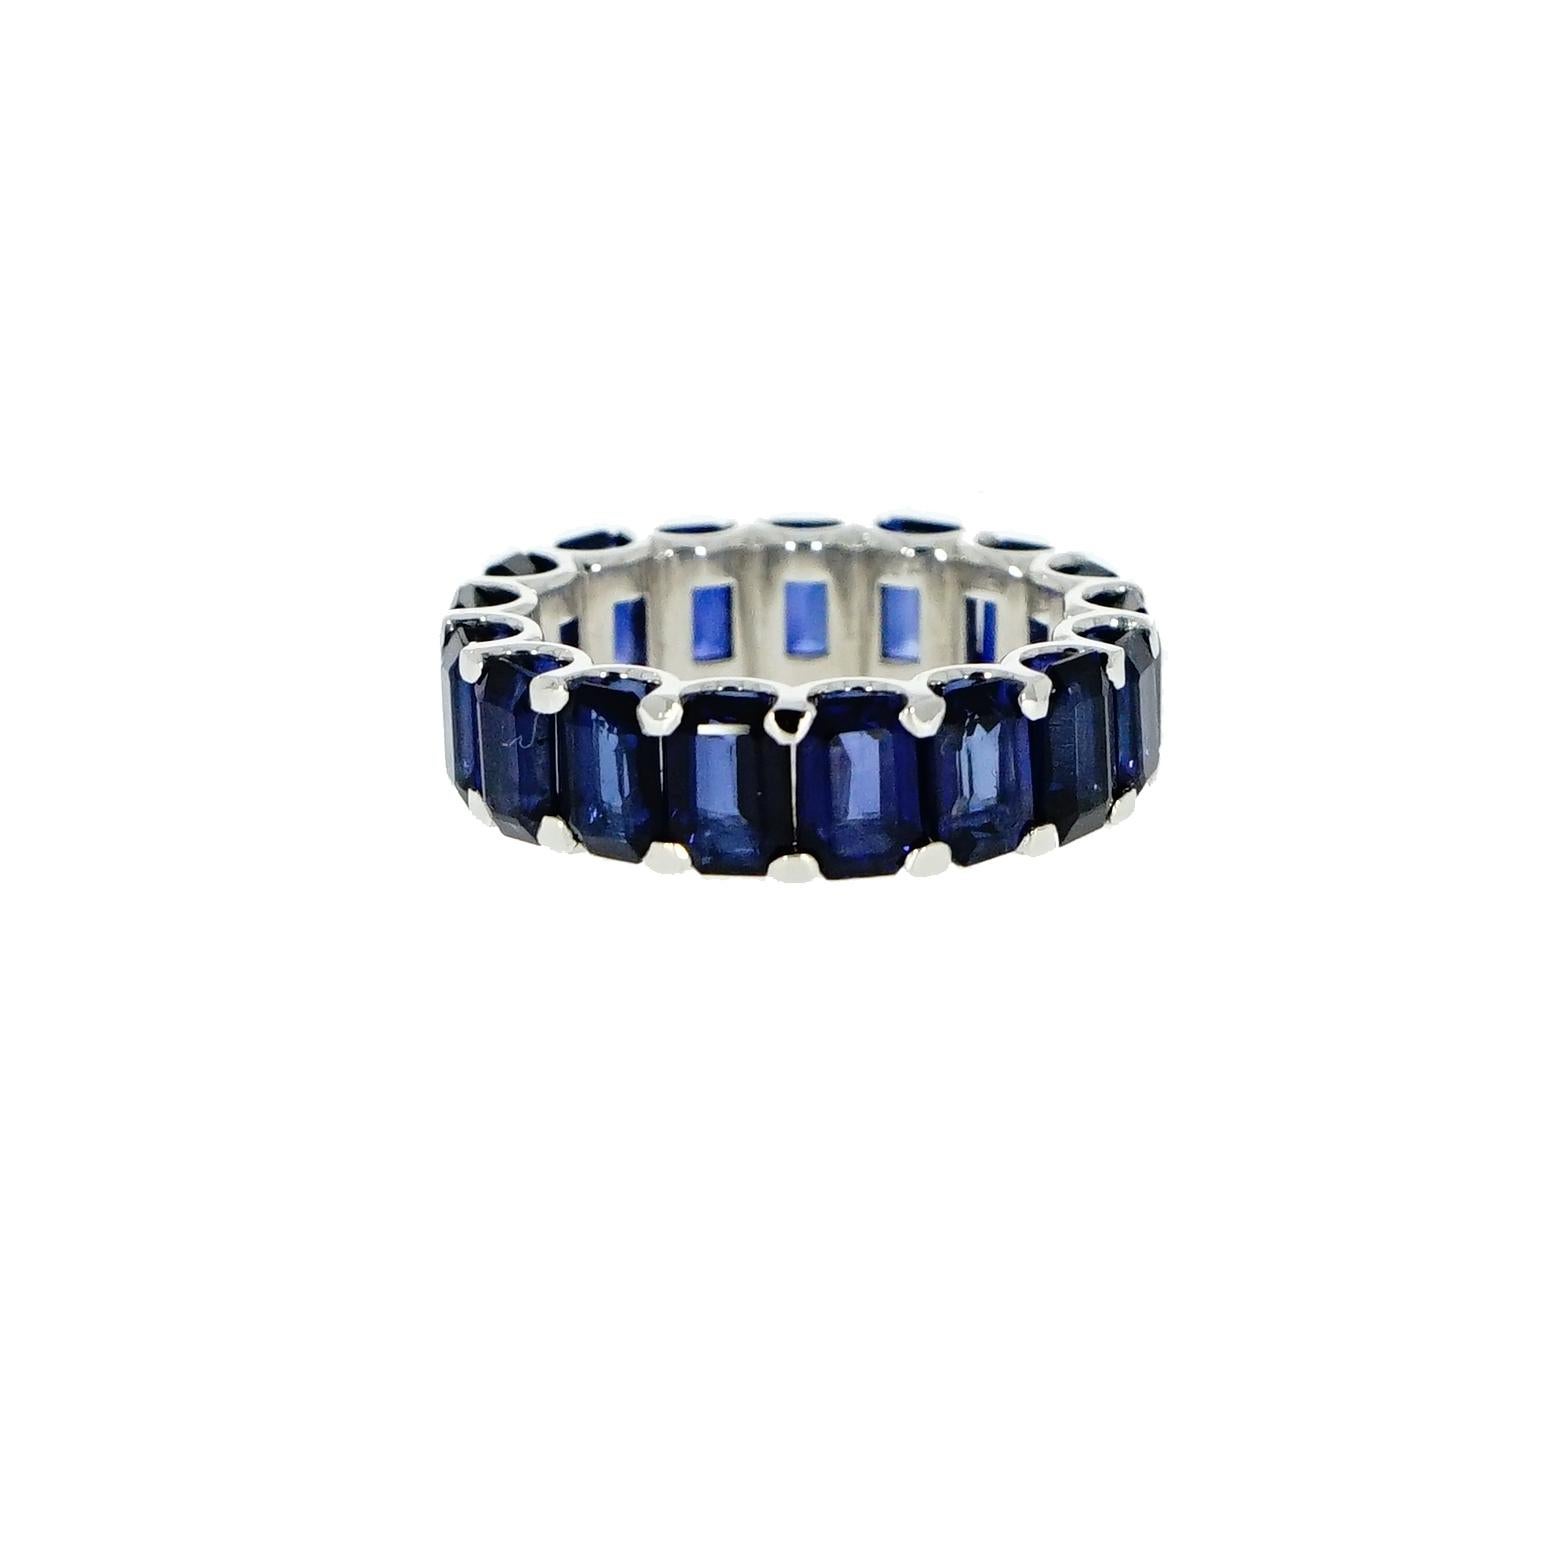 A timeless ring, Blue Sapphire Eternity Band. 
Crafted in 18k White Gold with 17 emerald-cut Sapphires totaling 10.86 carats. 
This design is one for the classics, handmade in Italy for a finger size 7
